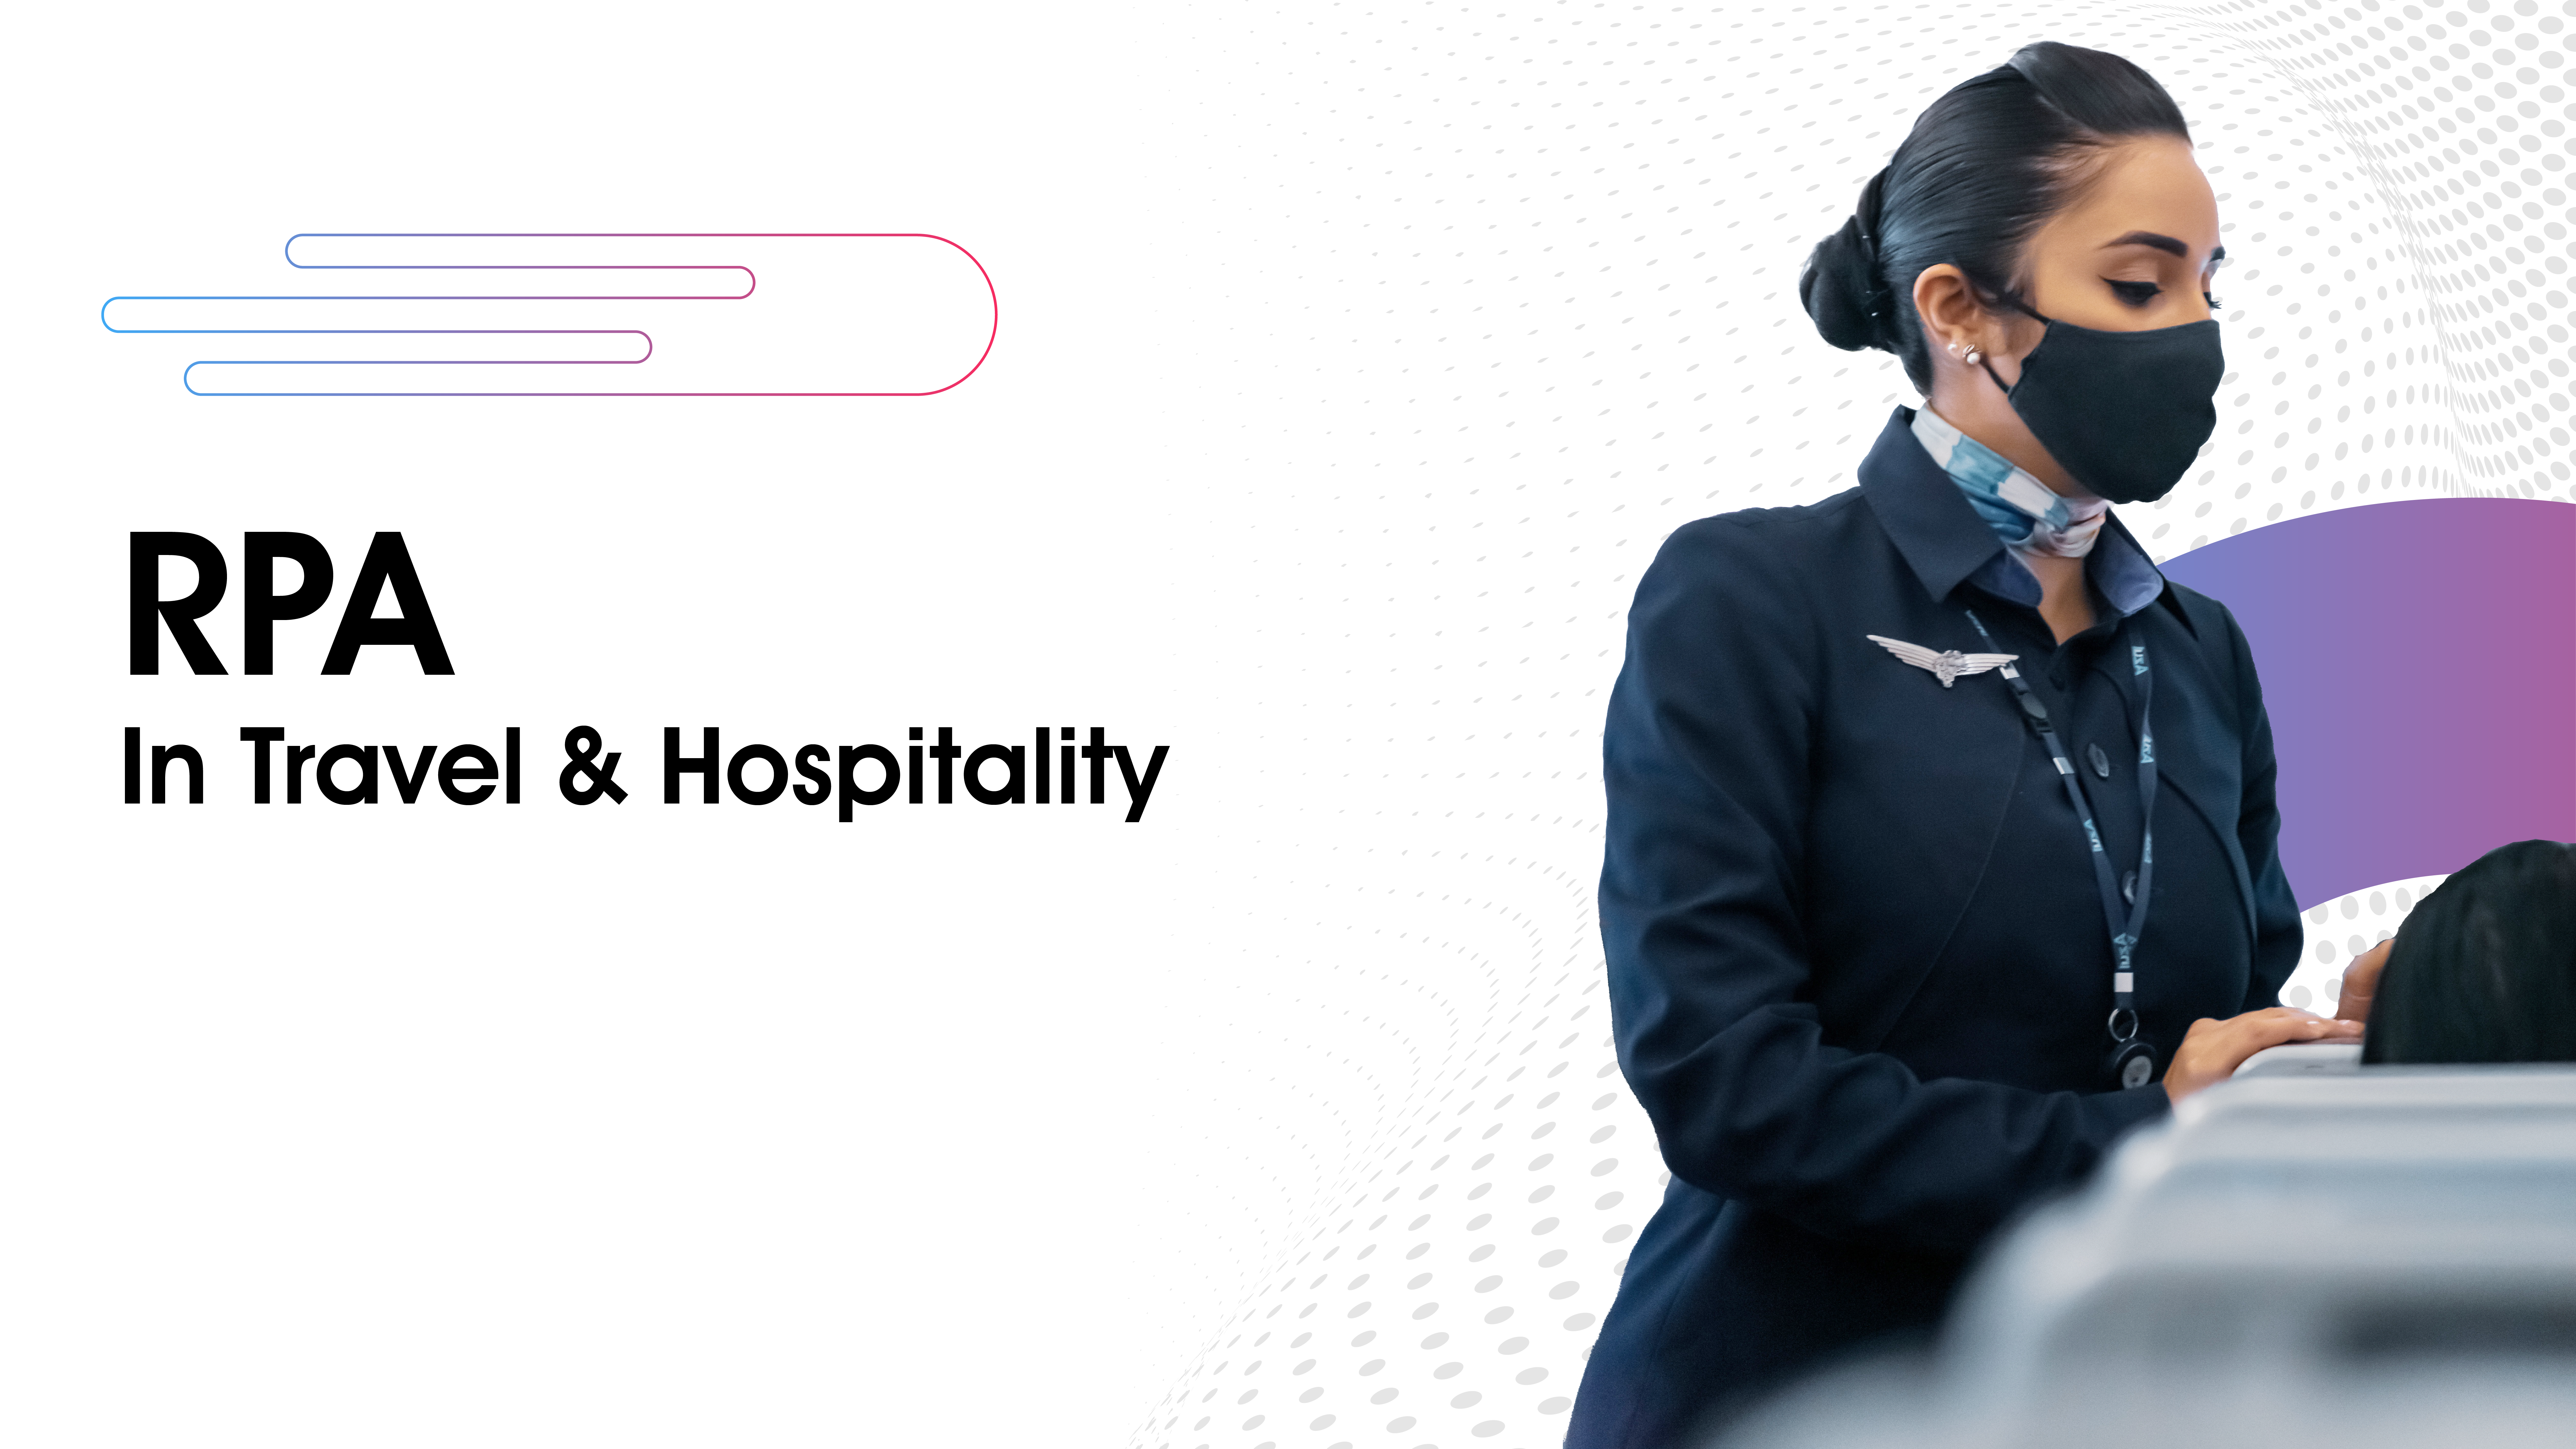 RPA in Travel & Hospitality